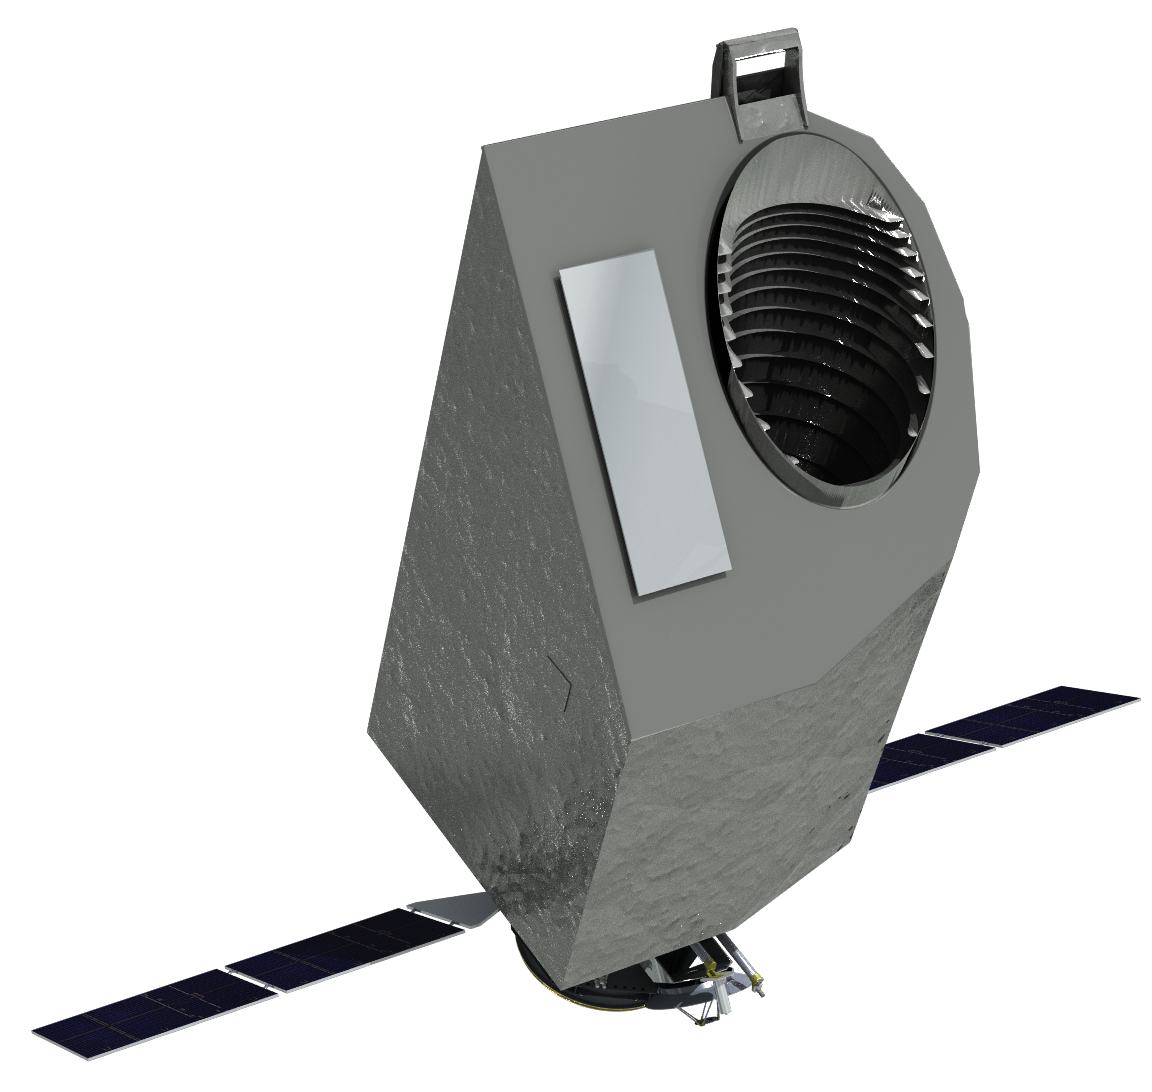 a gray, boxy satellite with wing-like solar panels and an opening at the top to collect UV light